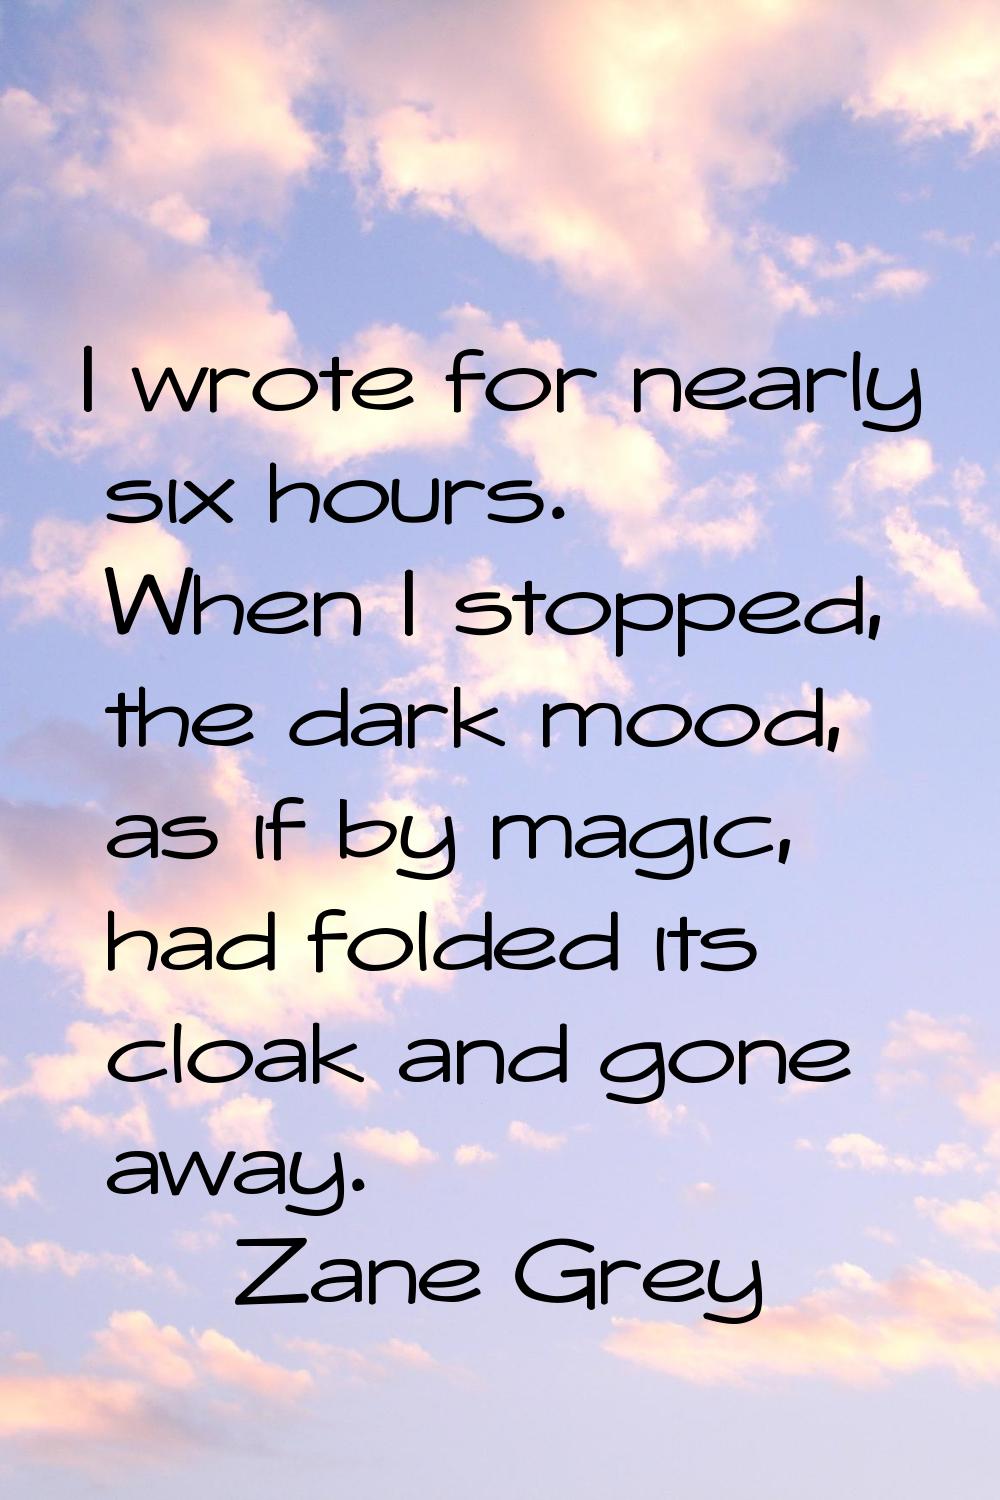 I wrote for nearly six hours. When I stopped, the dark mood, as if by magic, had folded its cloak a